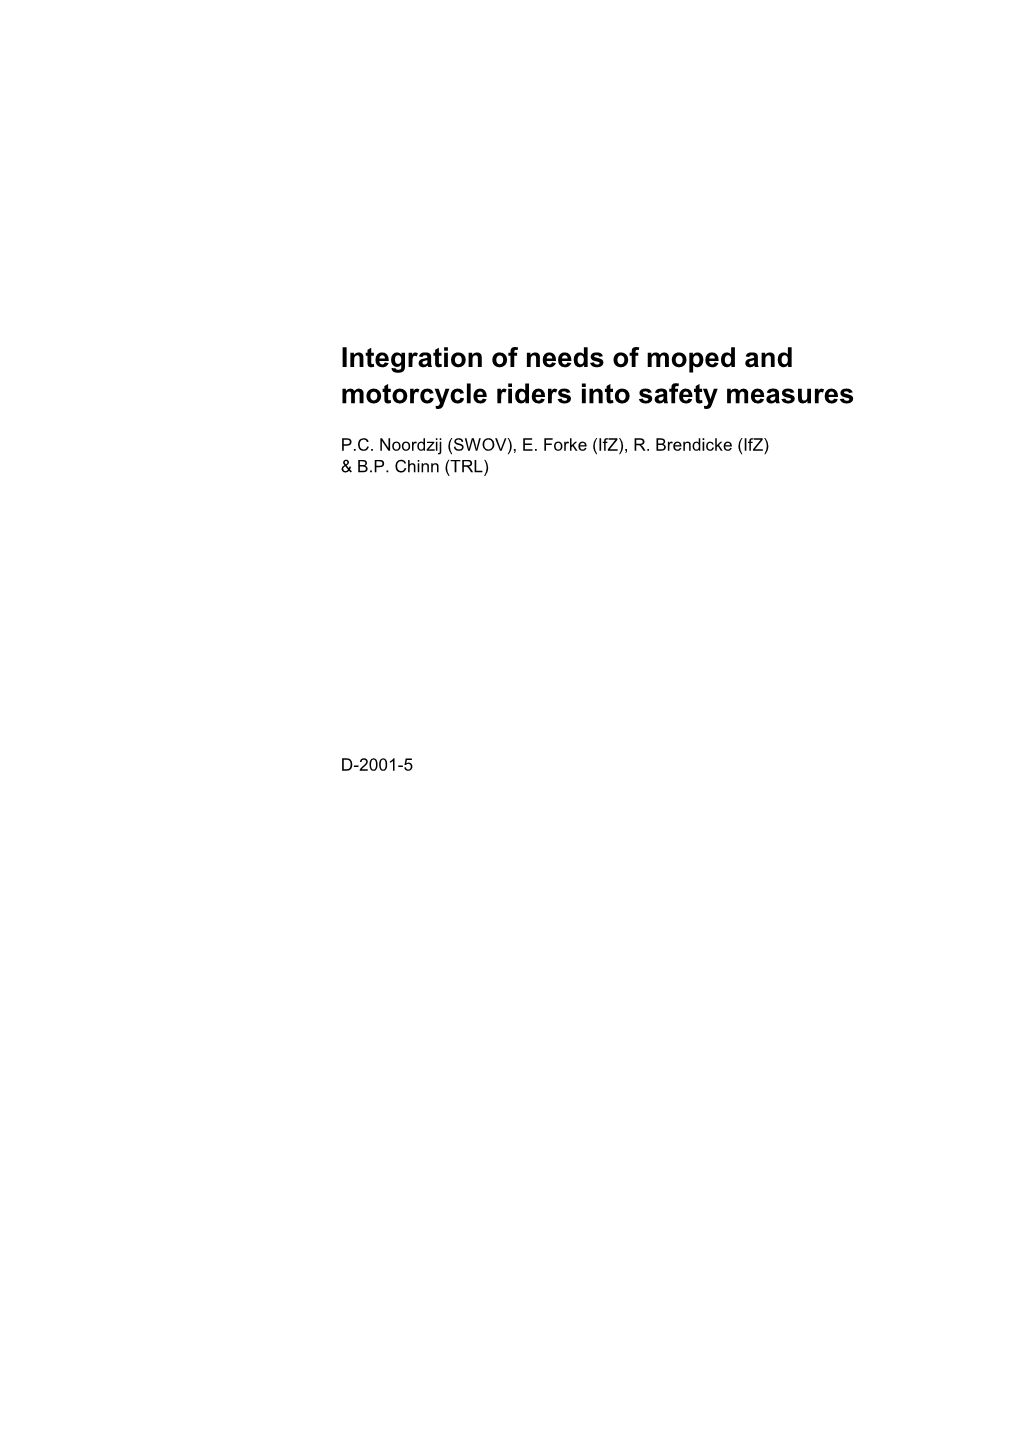 Integration of Needs of Moped and Motorcycle Riders Into Safety Measures